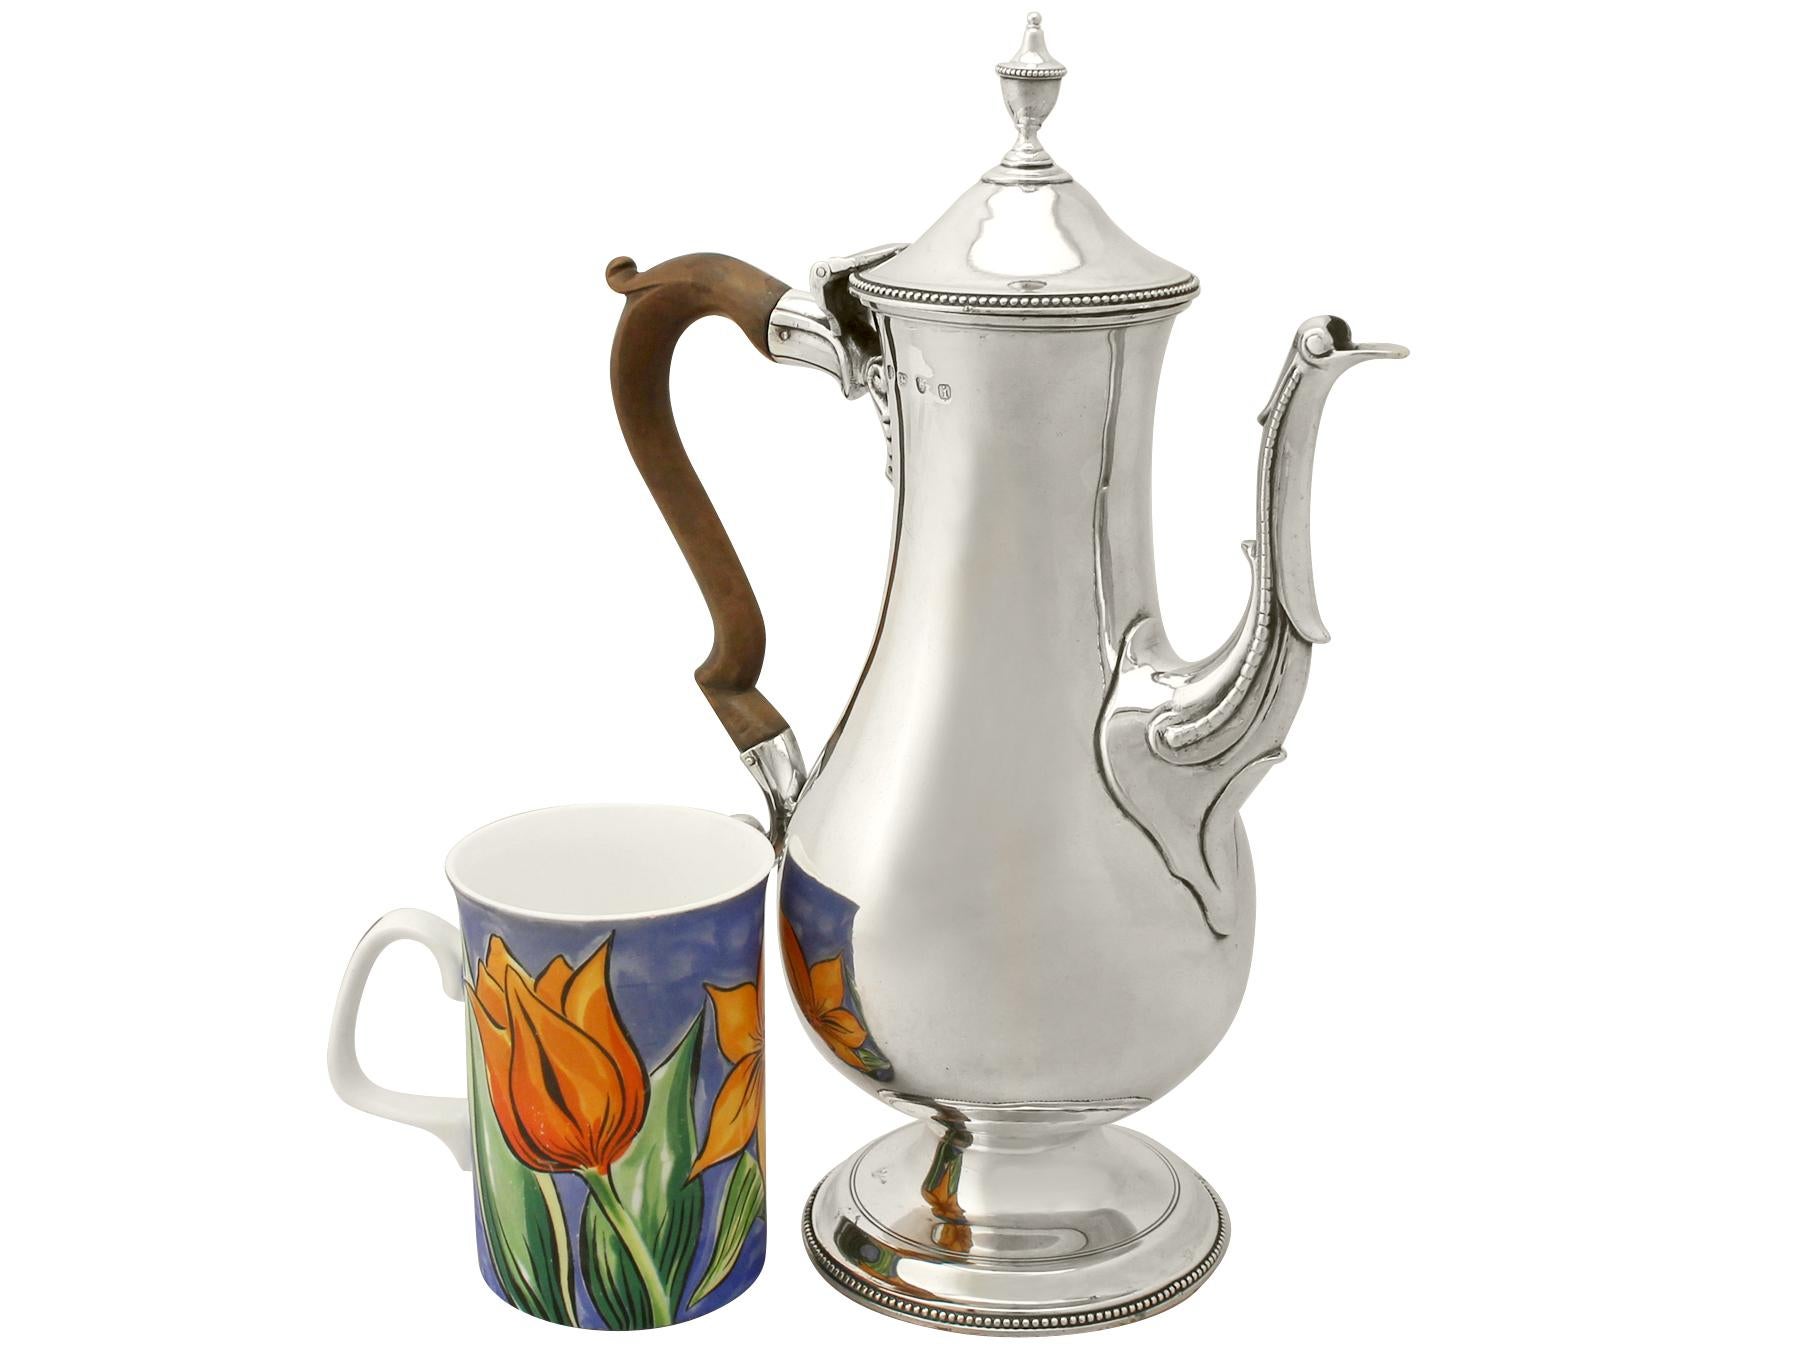 An exceptional, large and impressive antique Georgian English sterling silver coffee pot by Hester Bateman an addition to our silver teaware collection

This exceptional antique George III sterling silver coffee pot has a plain baluster shaped